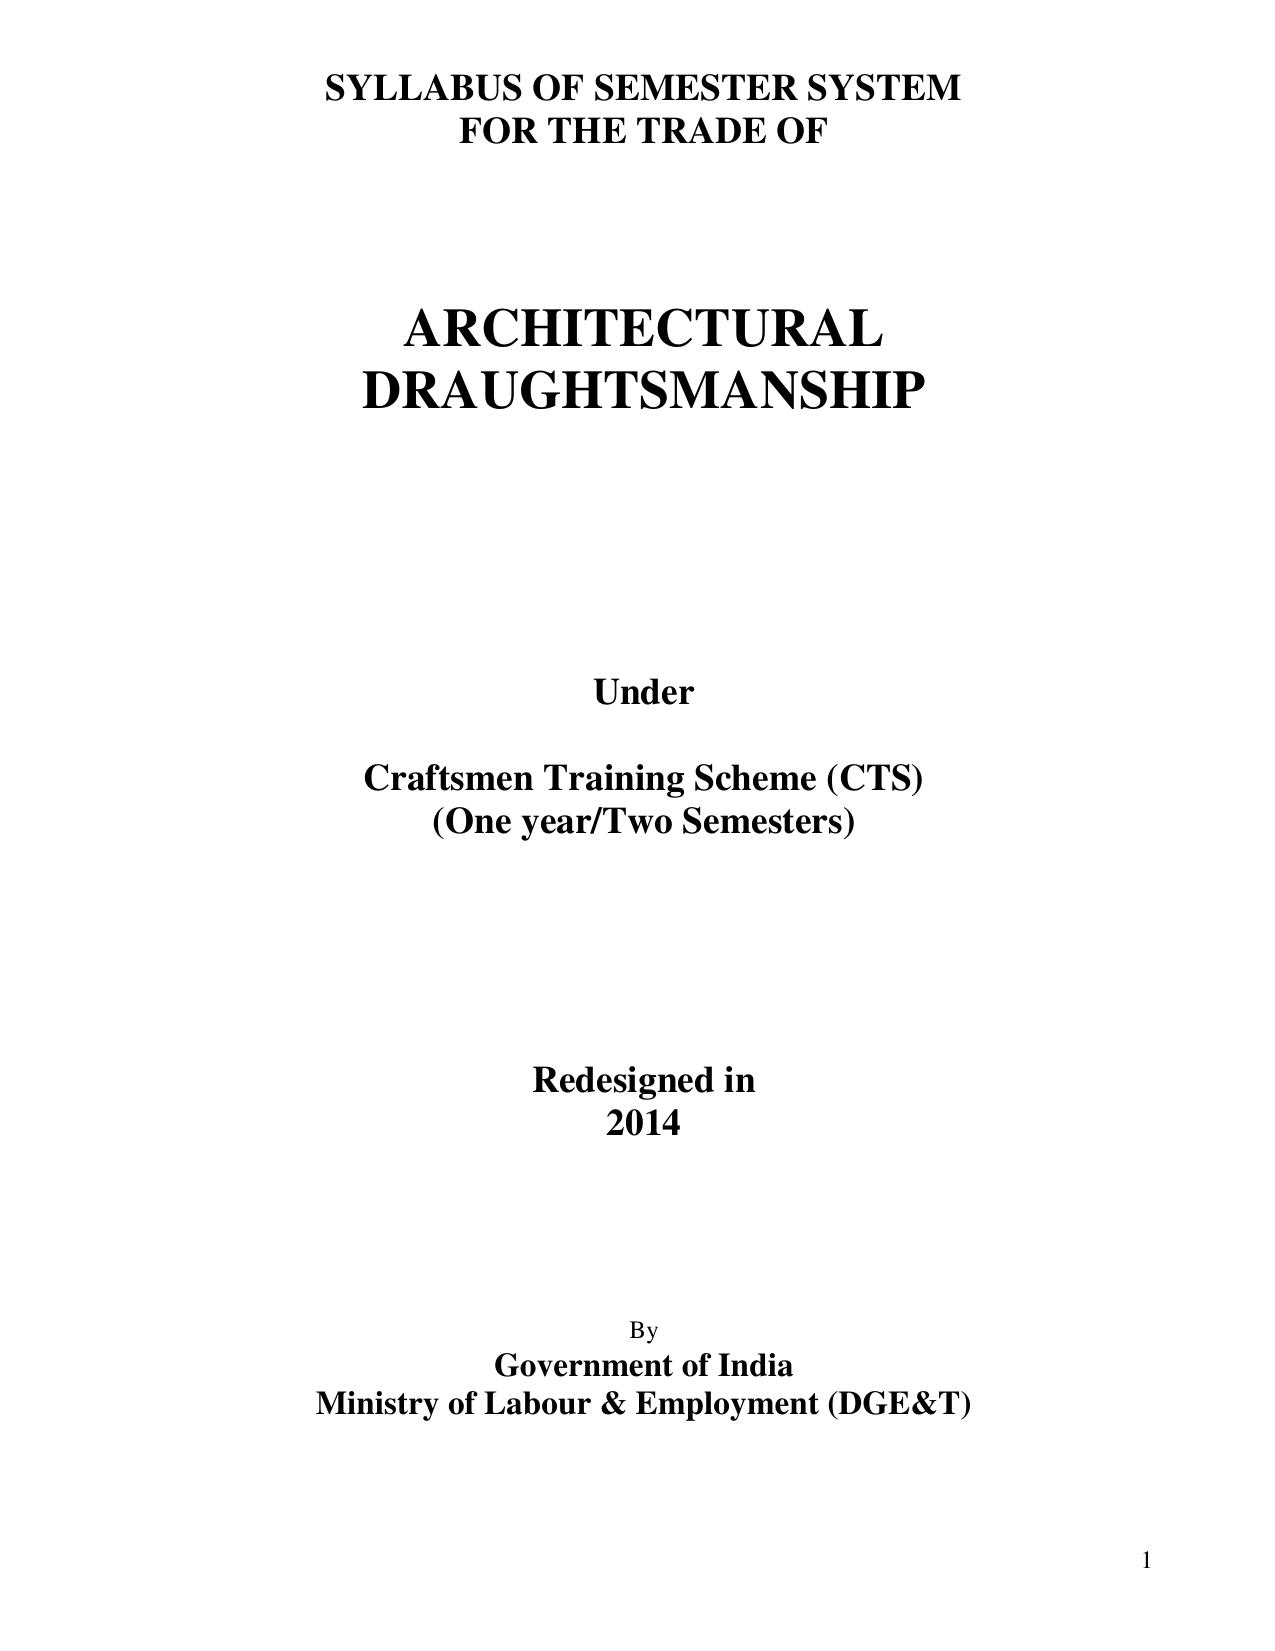 Syllabus for the trade of Architectural Draughtsmanship under CTS